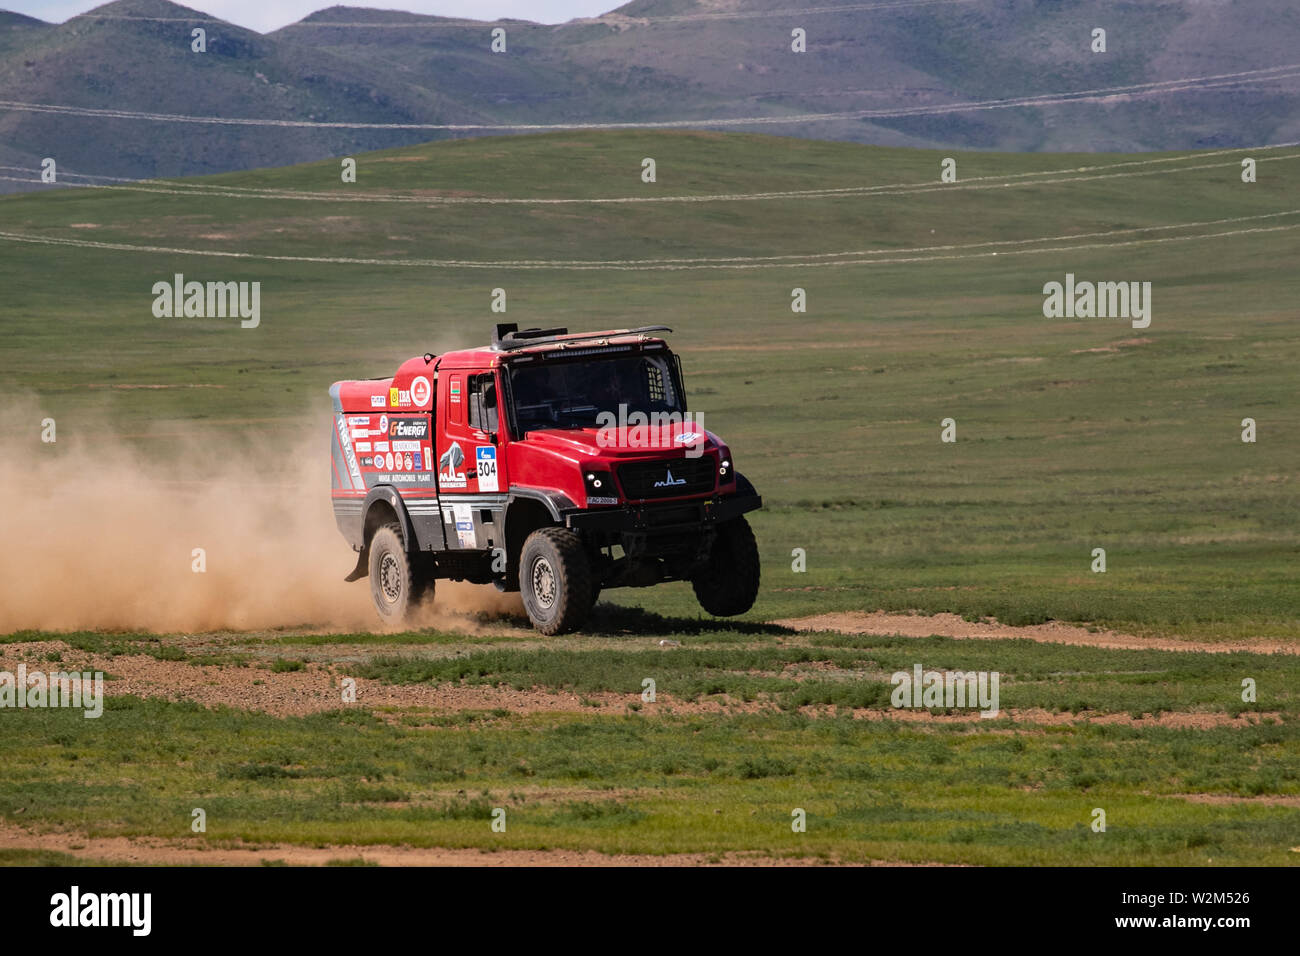 Ulan Bator, Mongolia. 9th July, 2019. Siarhei Viazovich and Andrei Zhyhulin of MAZ-SPORTauto Team compete in the 3rd stage of the Silkway Rally 2019 on the outskirts of Ulan Bator, Mongolia, July 9, 2019. Credit: Bai Xueqi/Xinhua/Alamy Live News Stock Photo